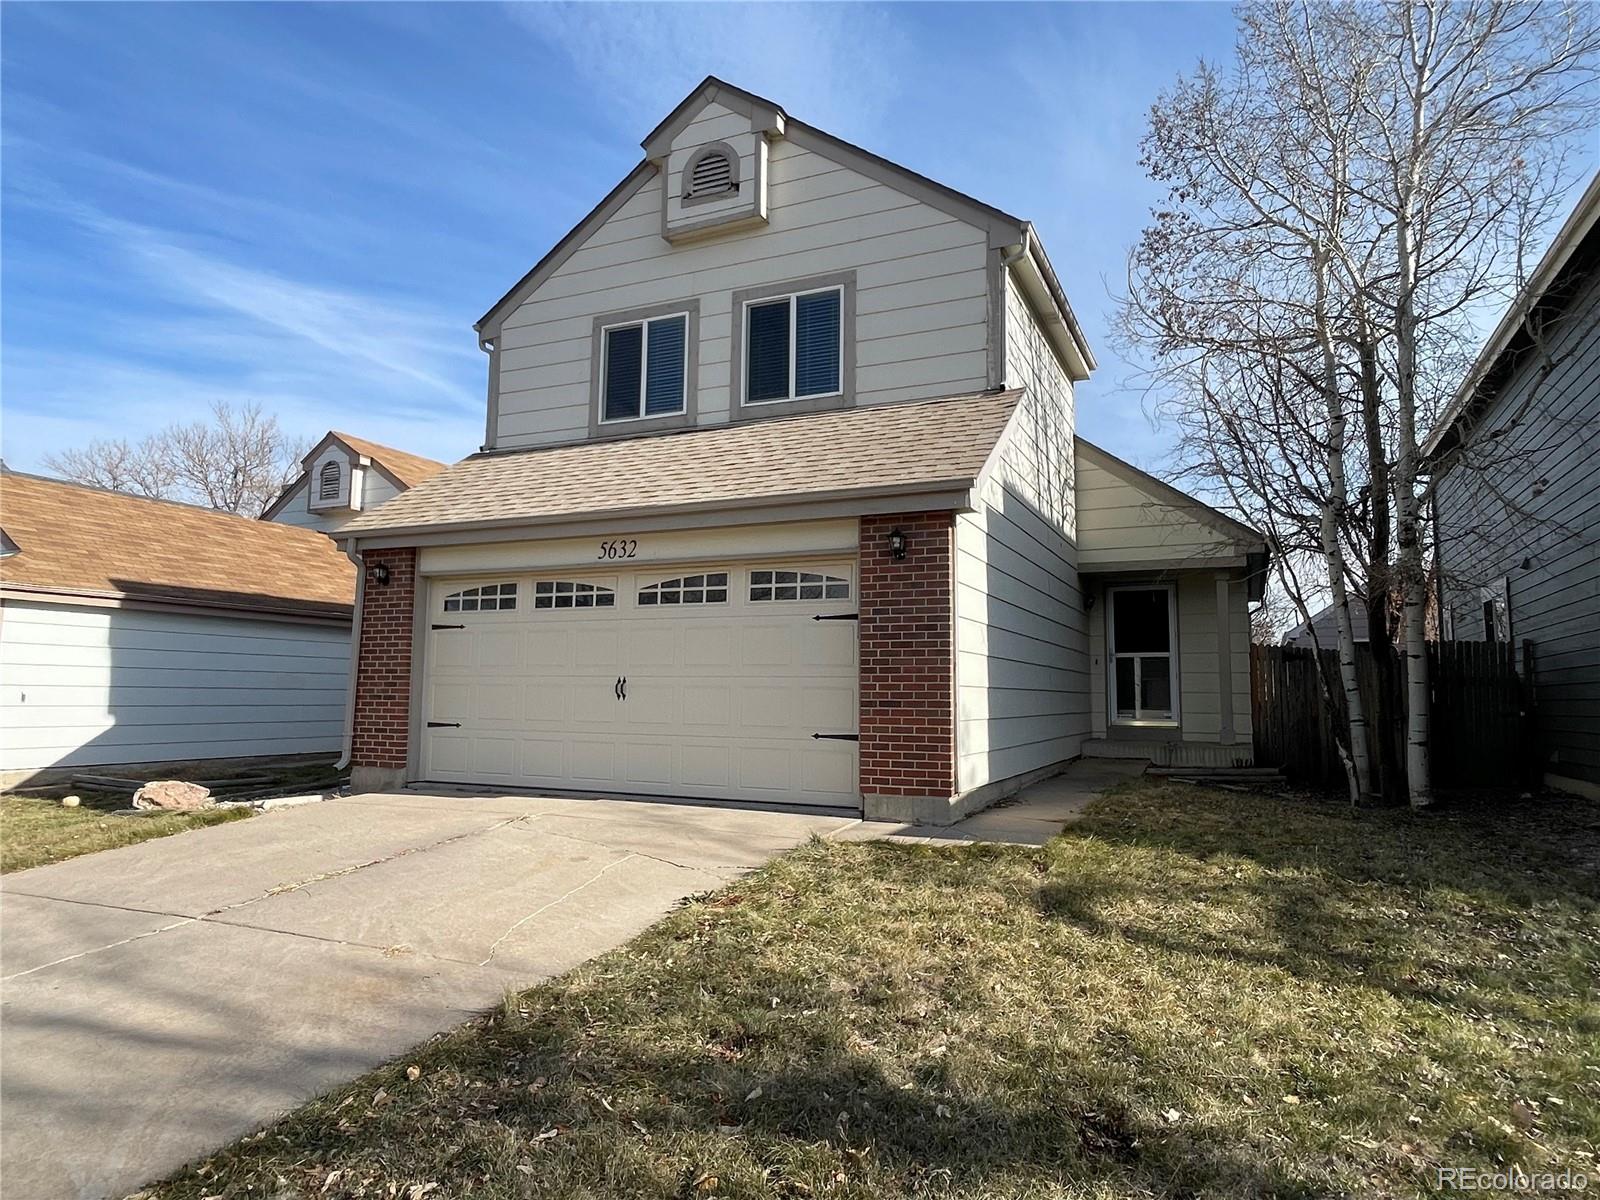 Report Image for 5632 S Yank Court,Littleton, Colorado